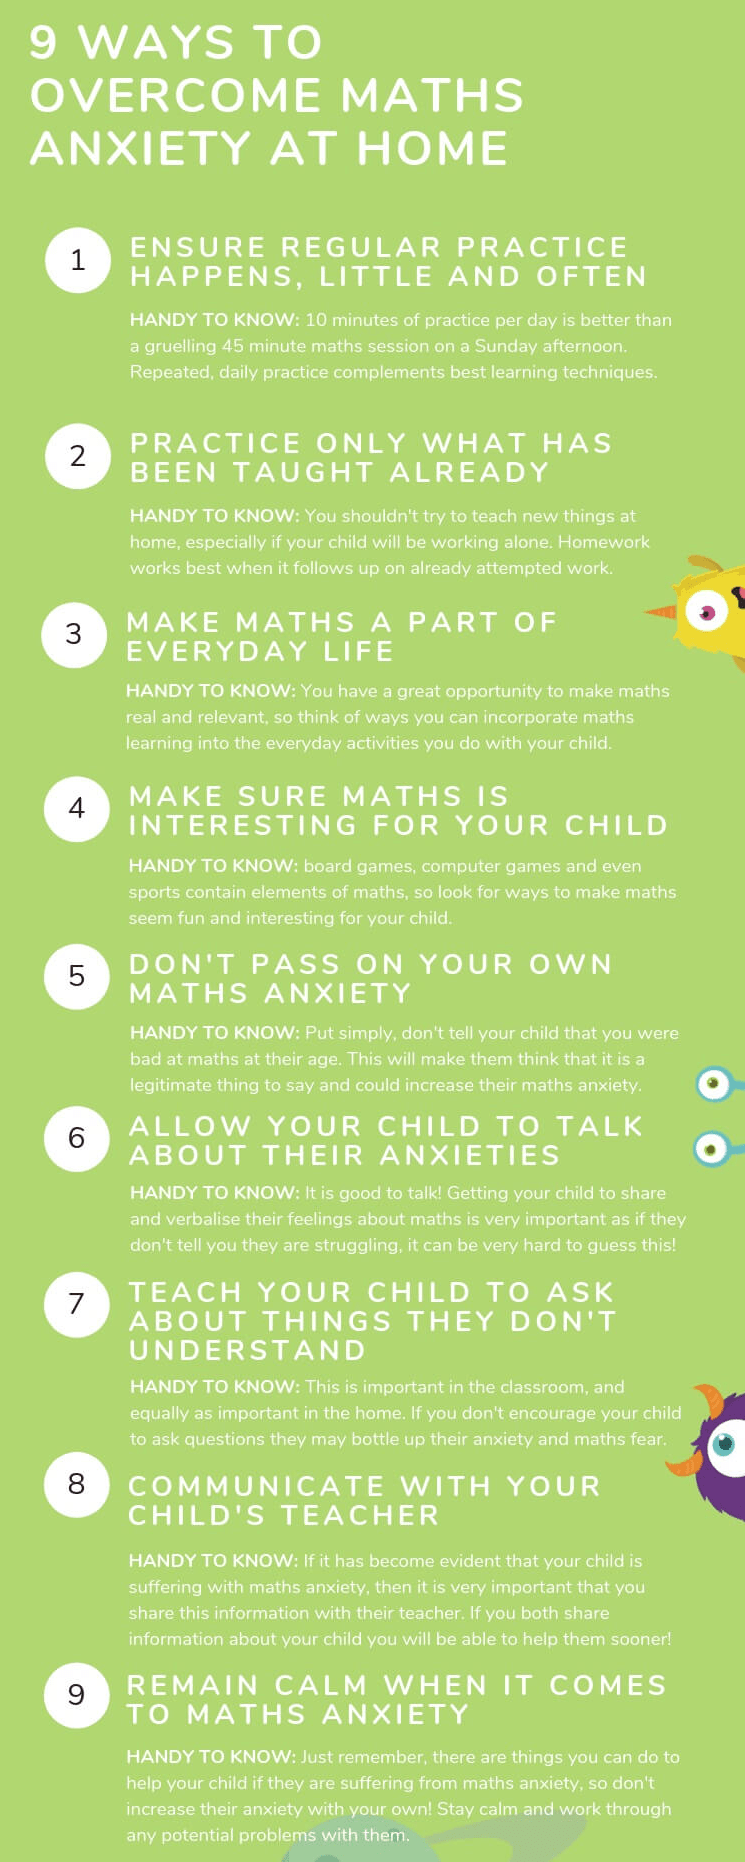 9 ways to overcome maths anxiety at home